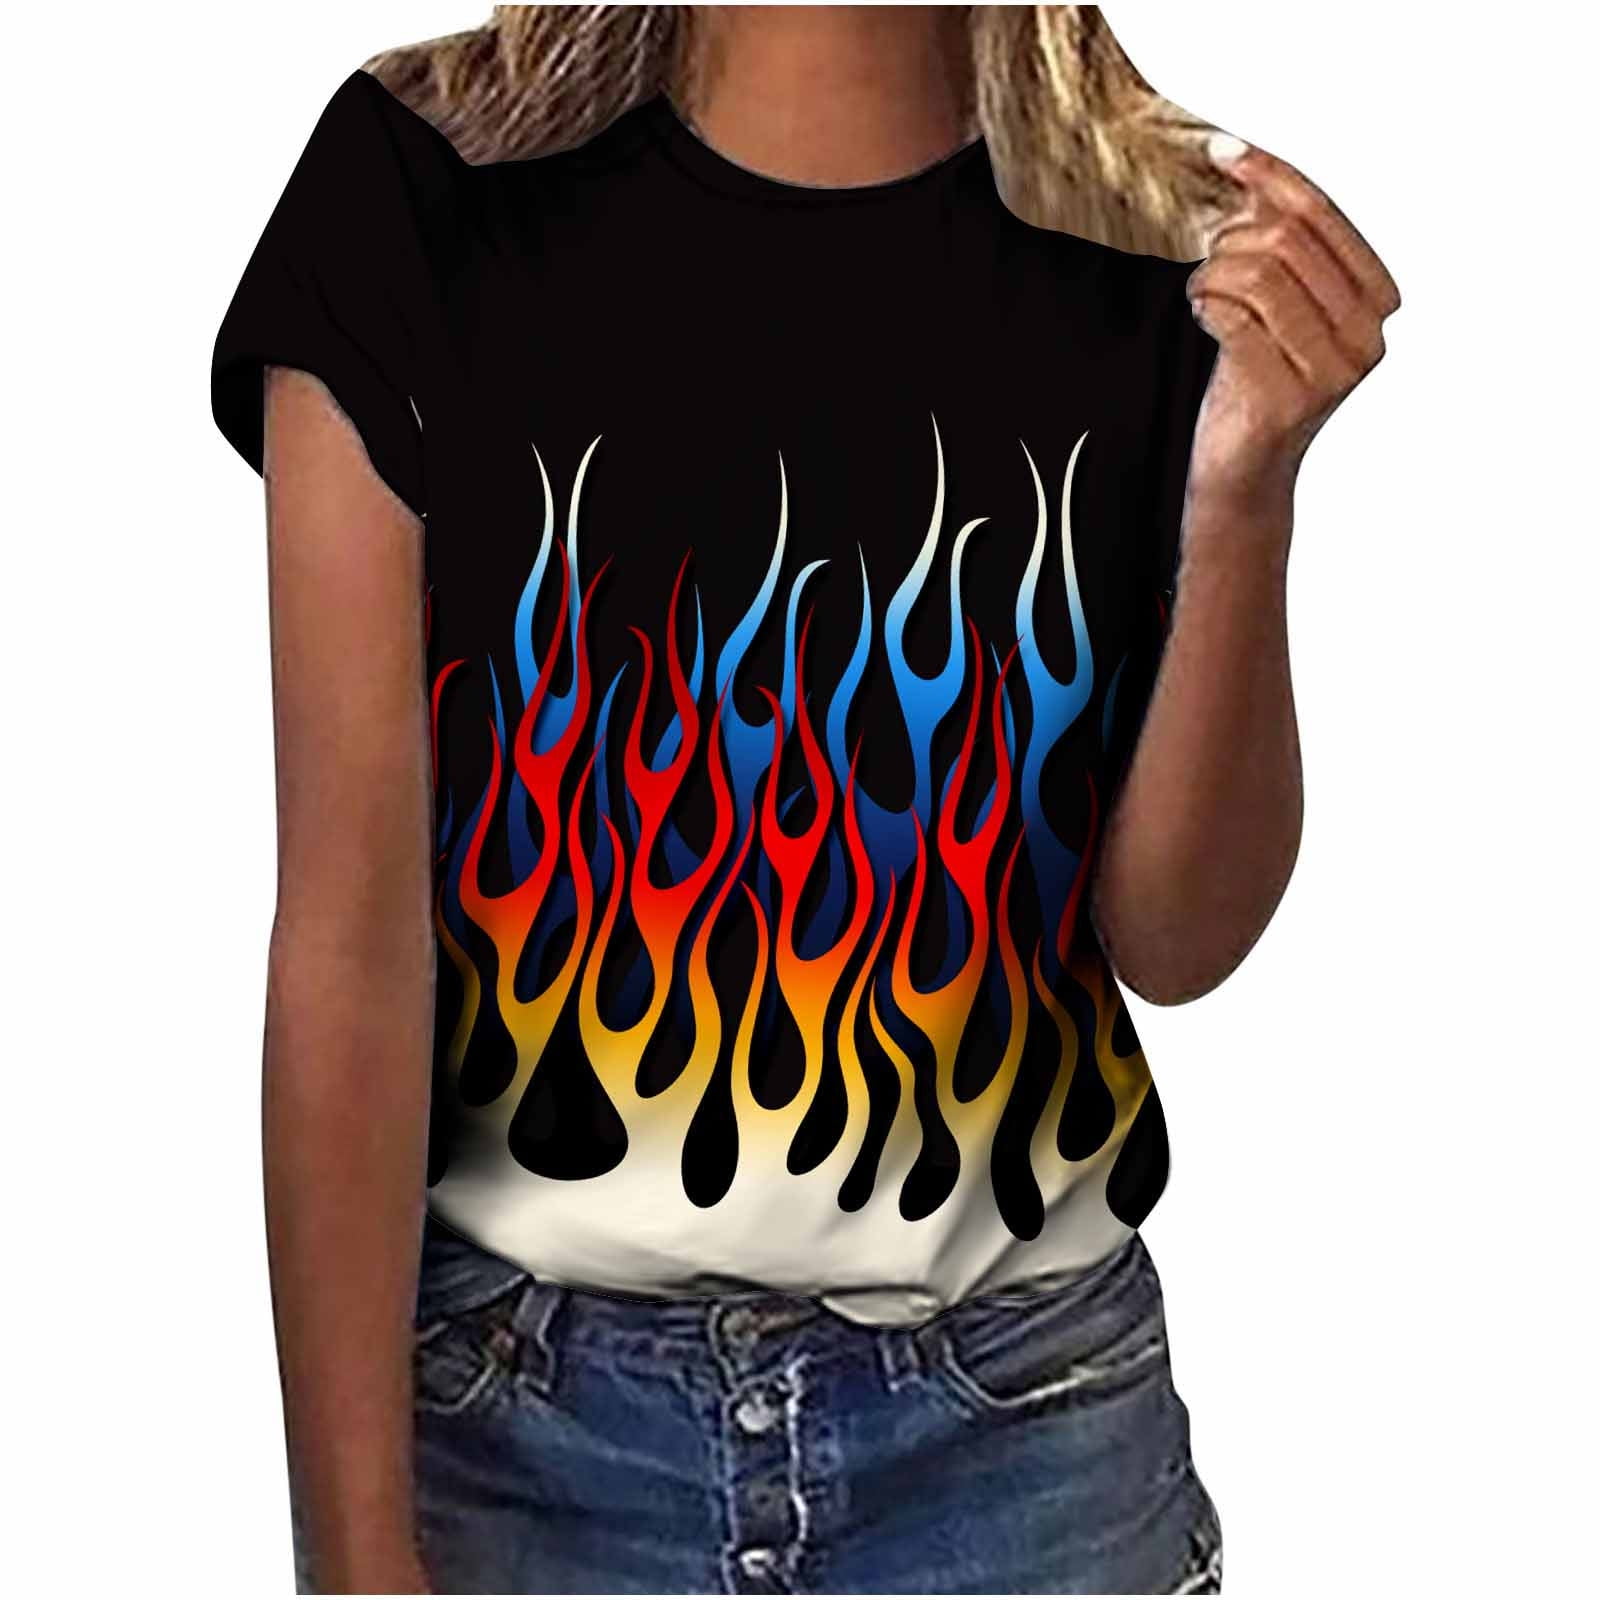 Newest Mens Womens Designers T Shirts Loose Tees Fashion Brands